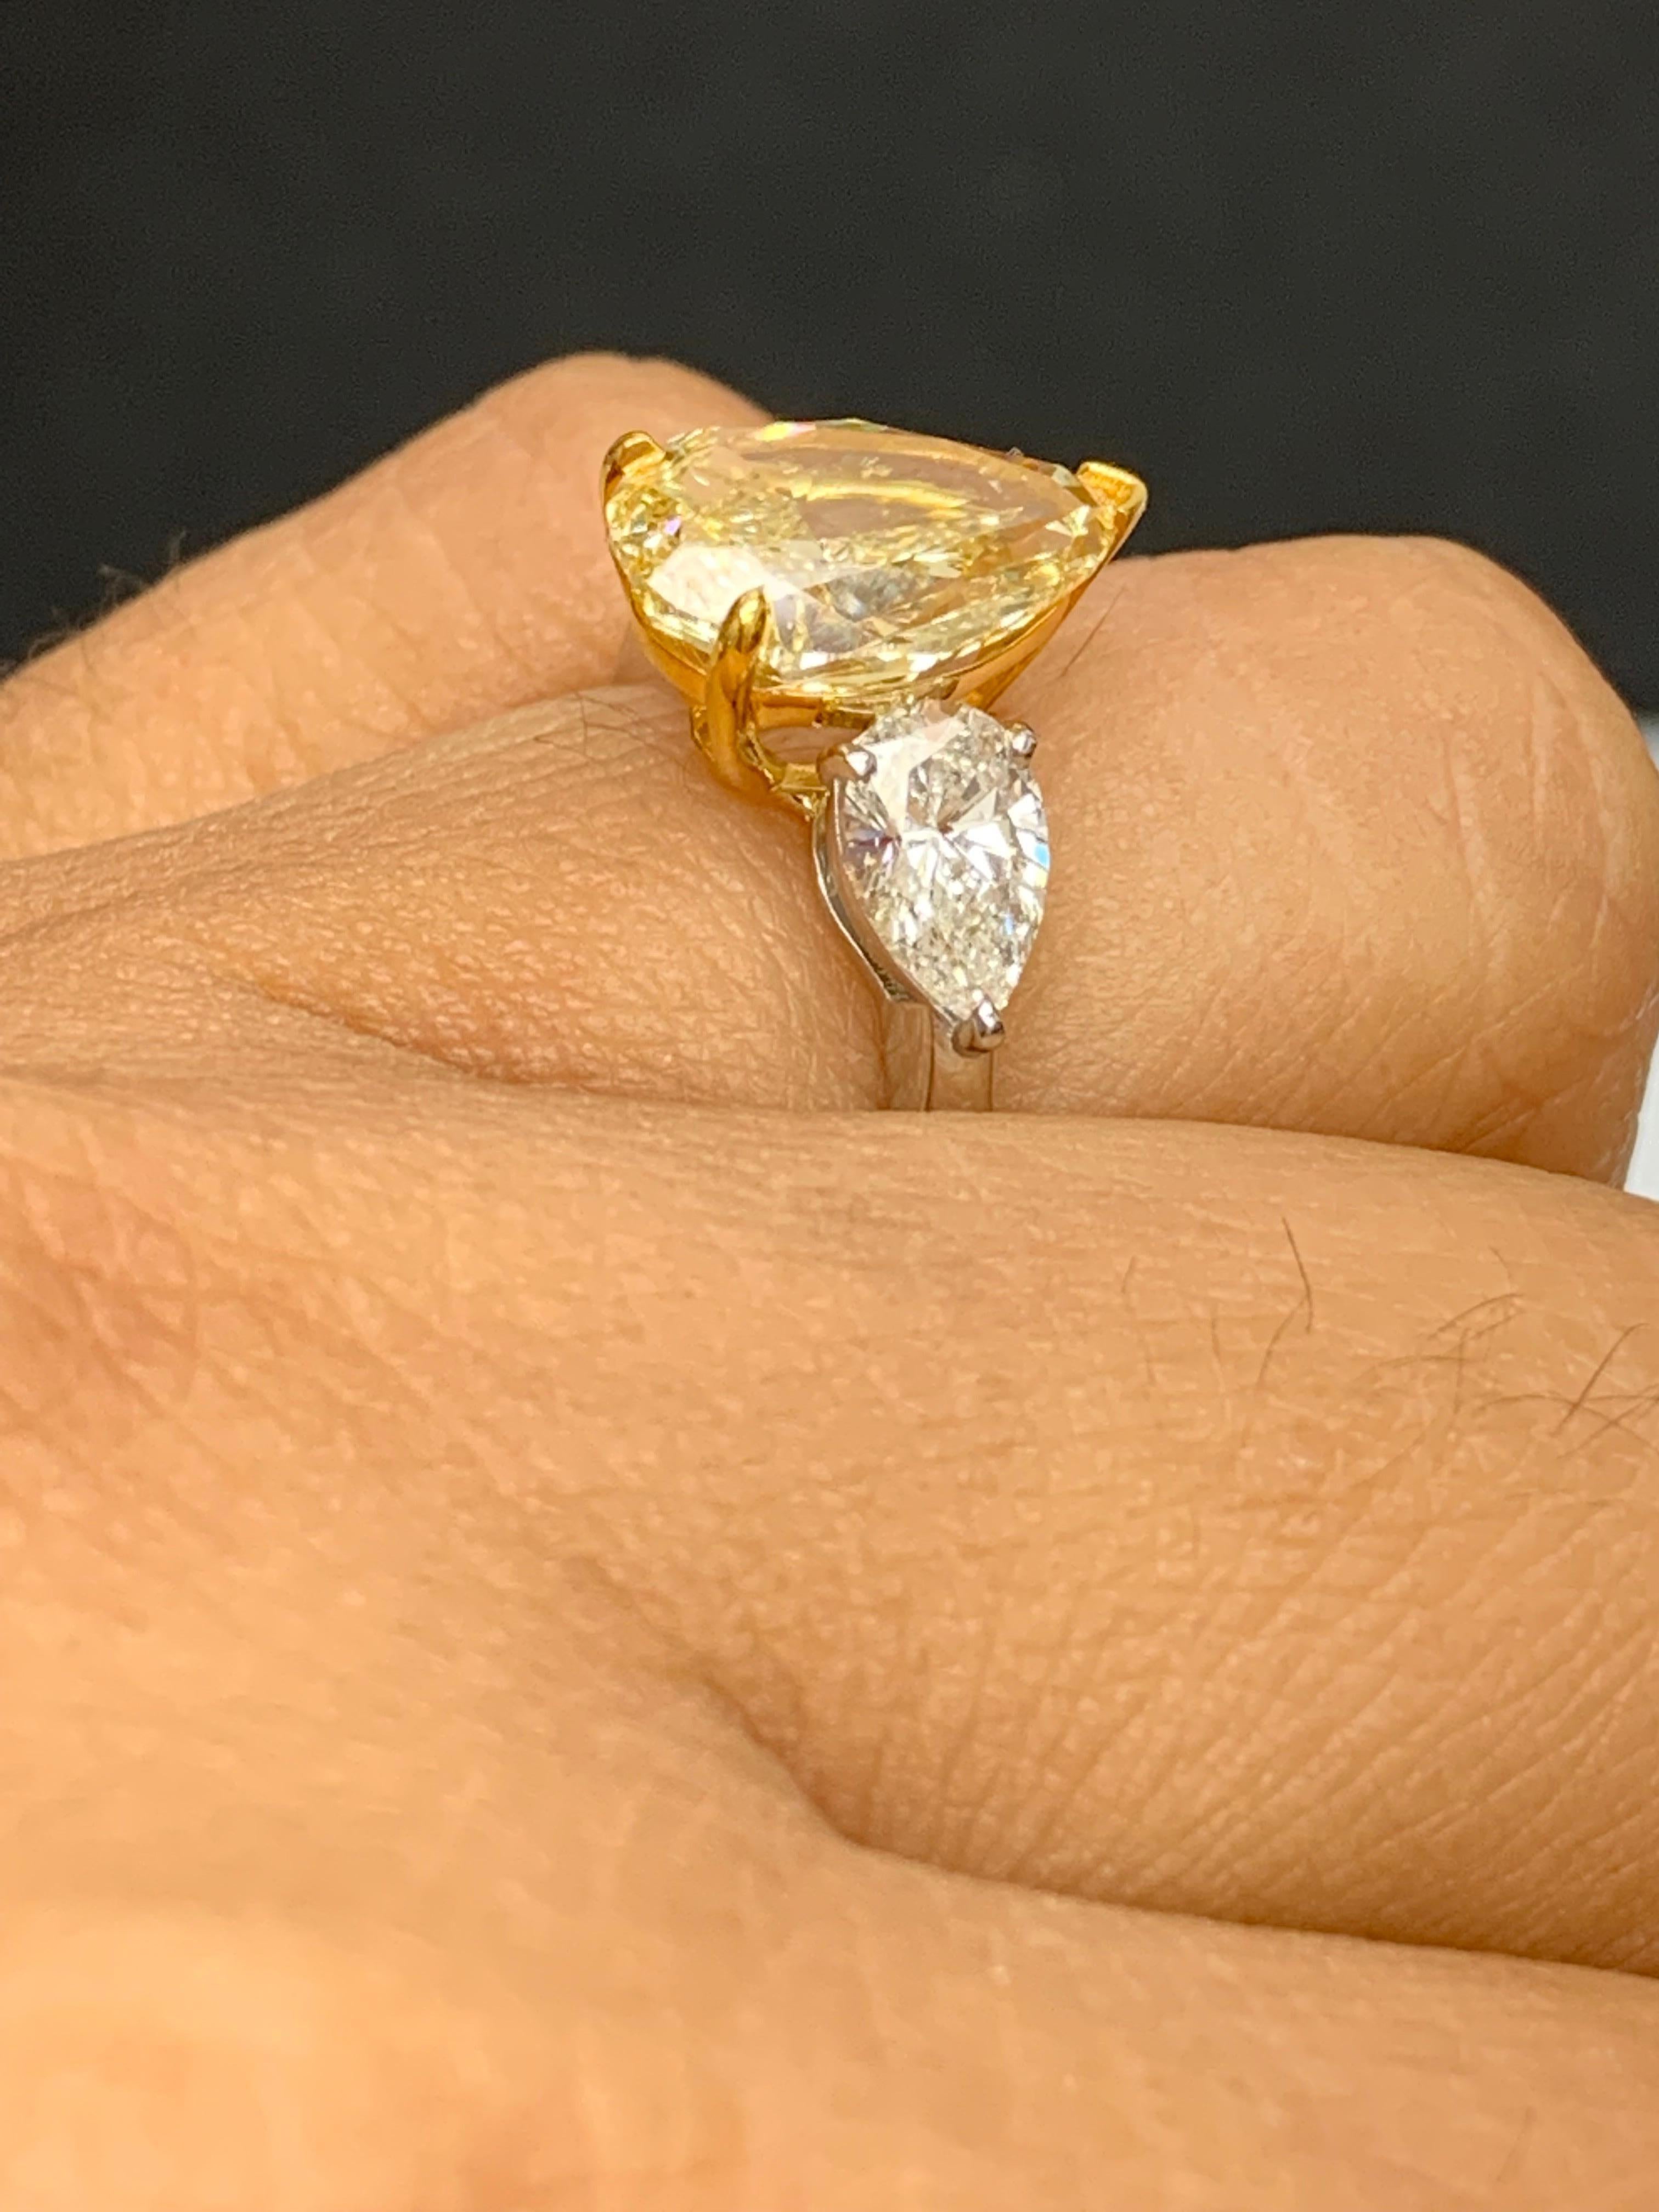 3.15 Carat Pear Shape Fancy Yellow Diamond 3 Stone Ring in Platinum For Sale 5